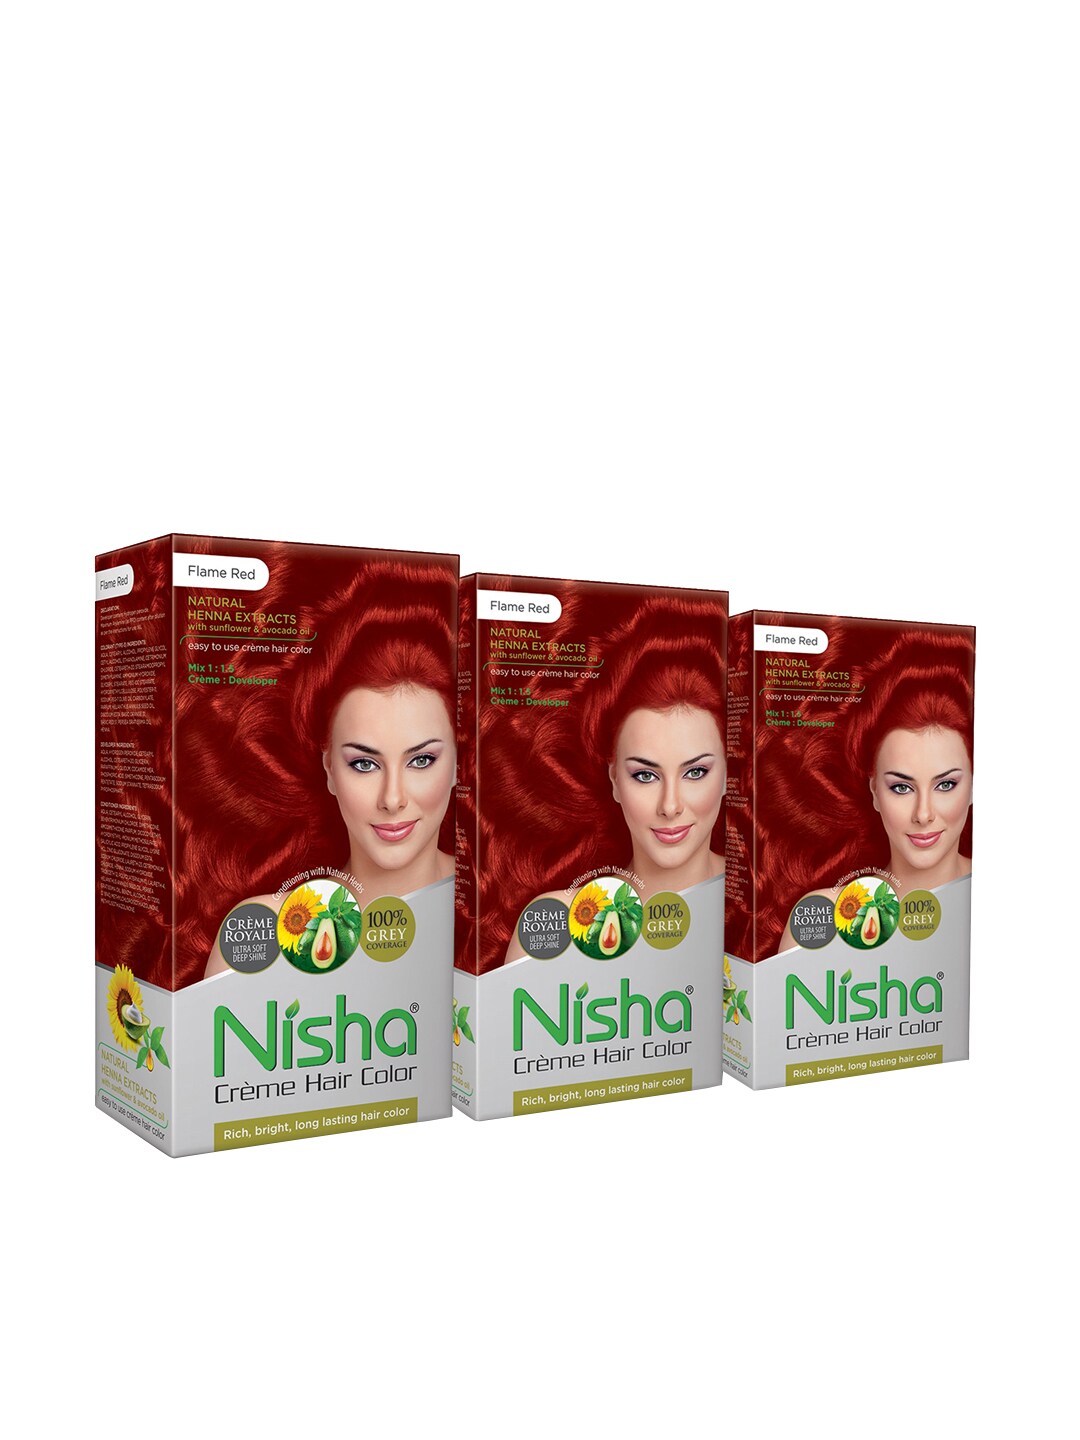 Nisha Pack of 3 Creme Hair Colour 450g - Flame Red Price in India